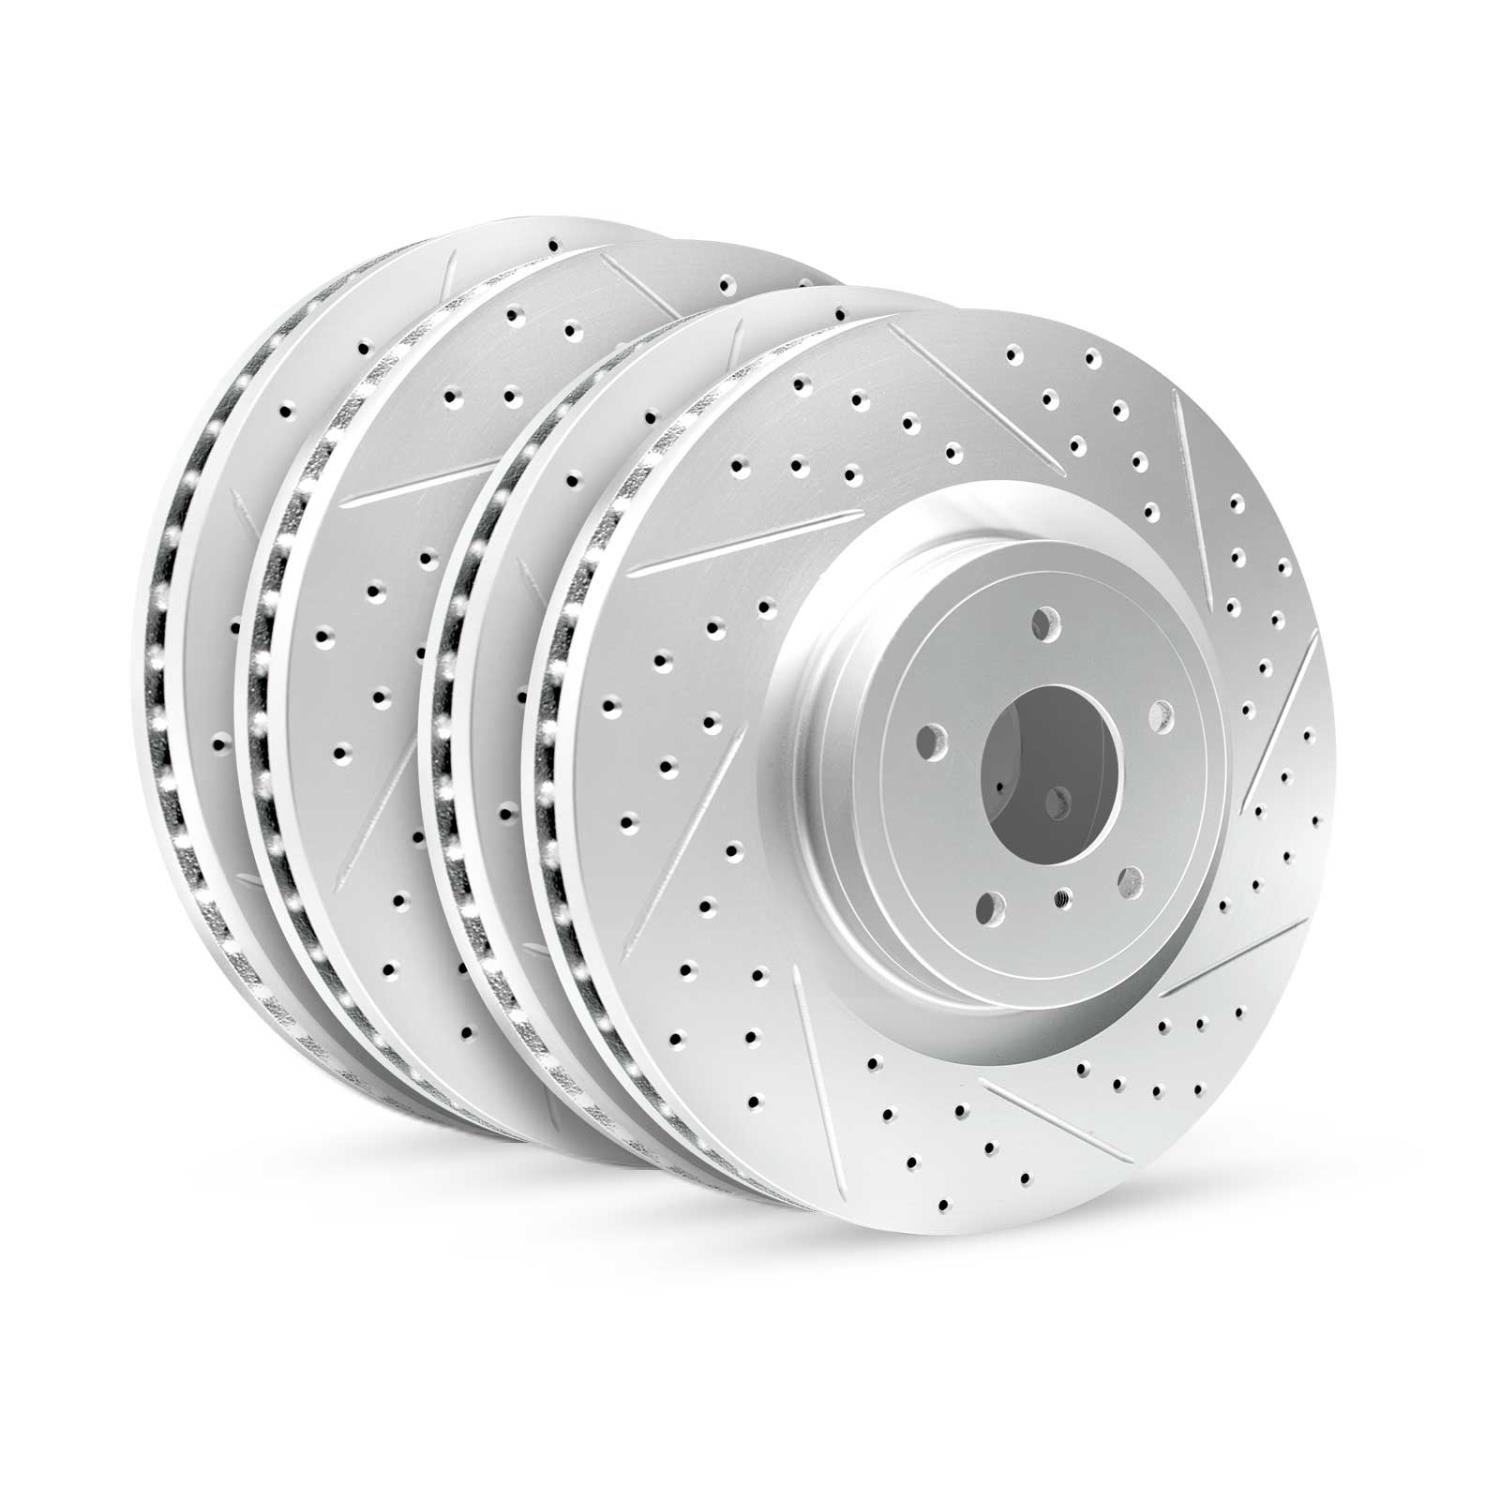 GEO-Carbon Drilled/Slotted Rotors, 2013-2017 Land Rover, Position: Front/Rear